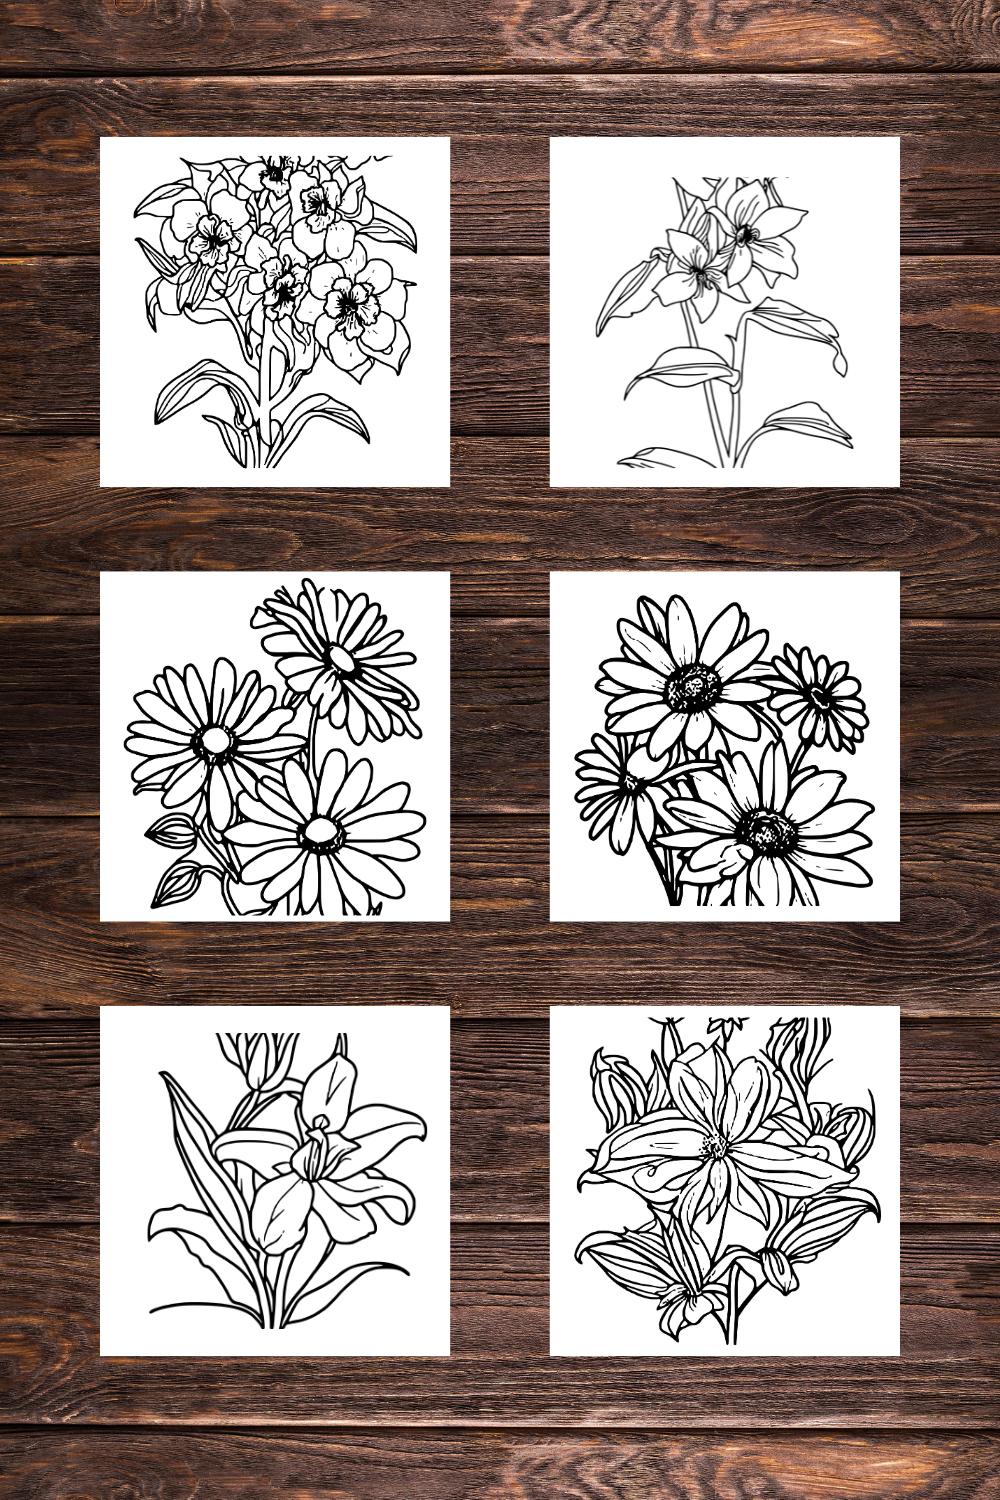 6 Flower Drawing Floral Coloring Pages bundle For Adults (SVG and PNG ) for KDP low content self-publishing pinterest preview image.